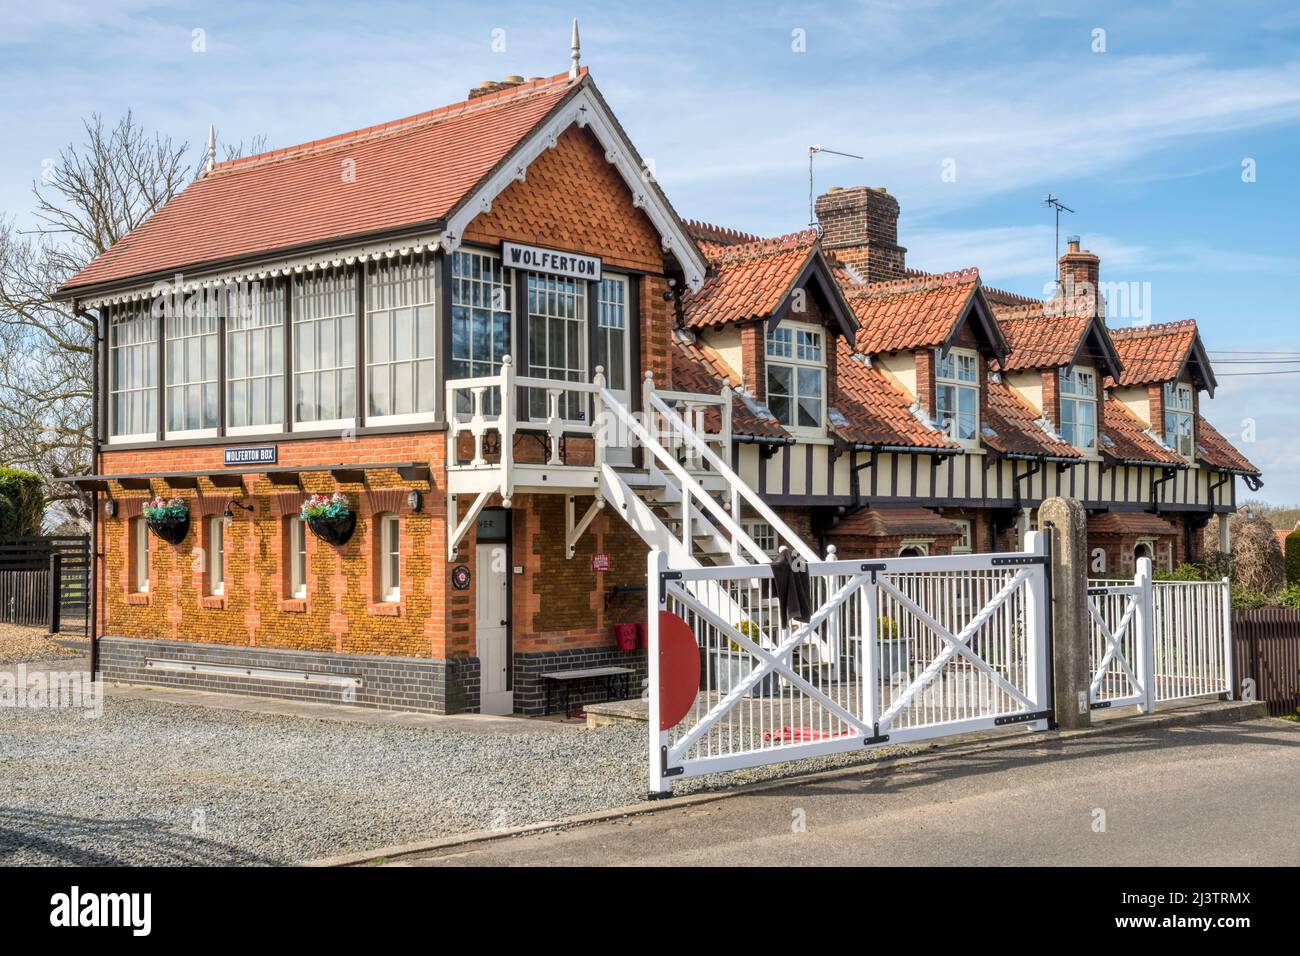 The old Wolferton Signal Box outside the closed Royal Station at Wolferton on the Sandringham Estate, Norfolk. Stock Photo